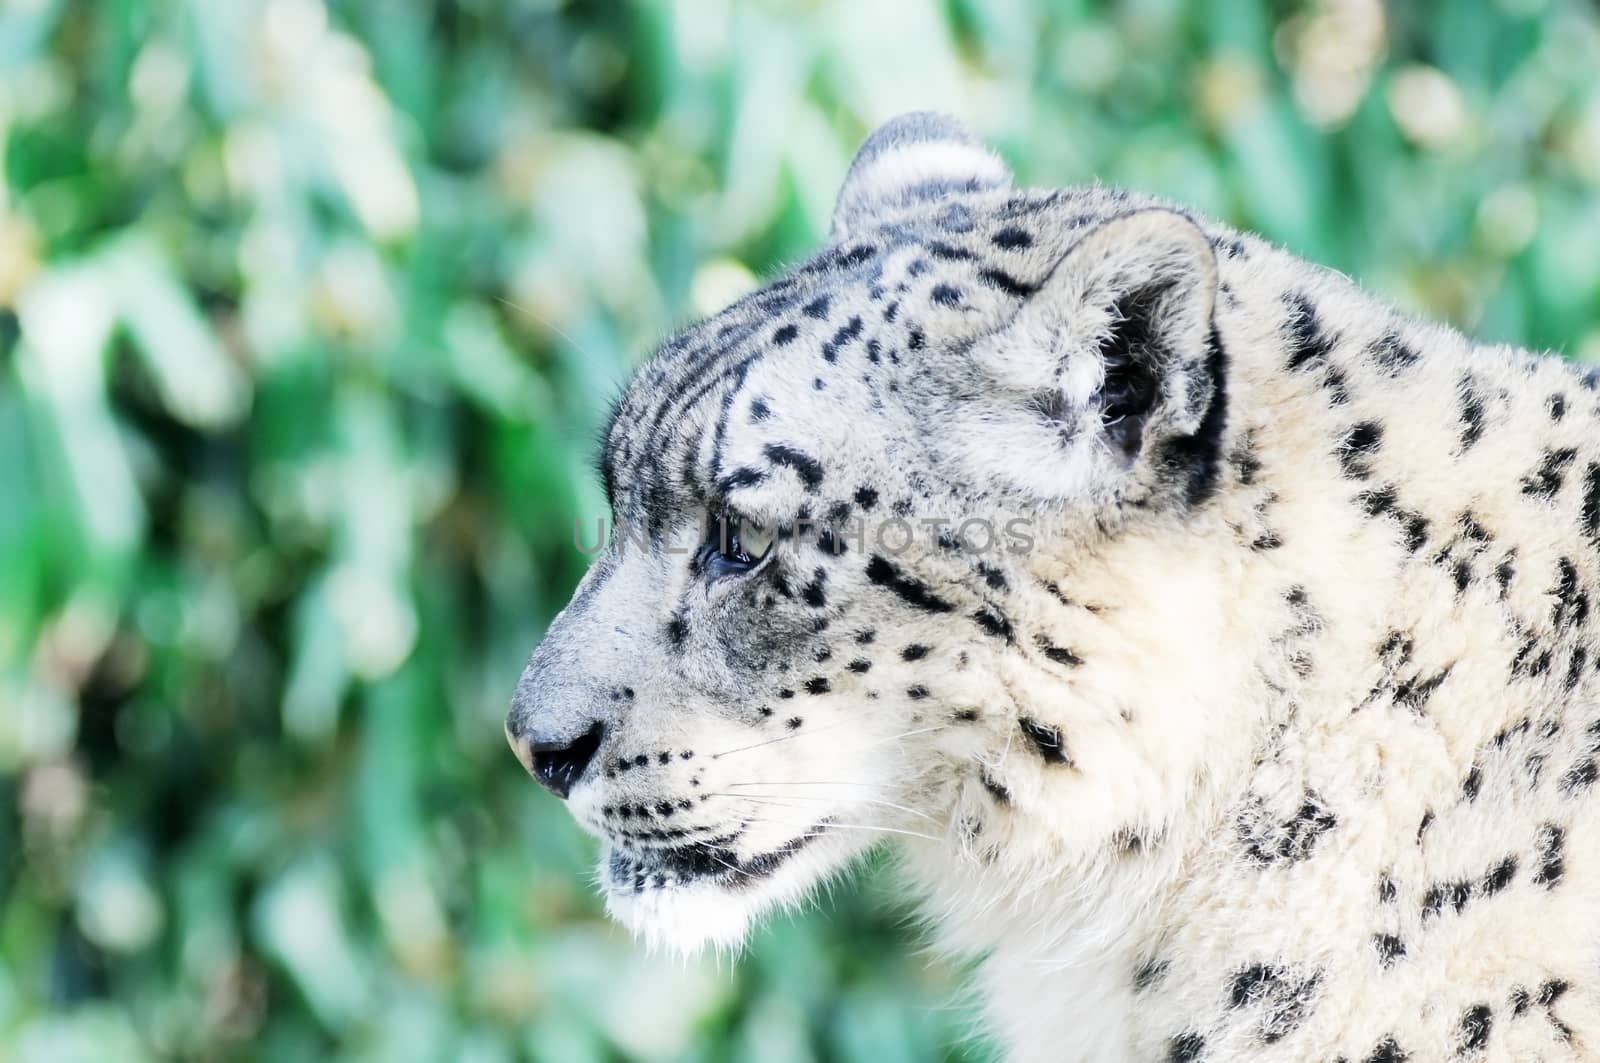 Closeup of snow leopard head and face in profile with fur detail